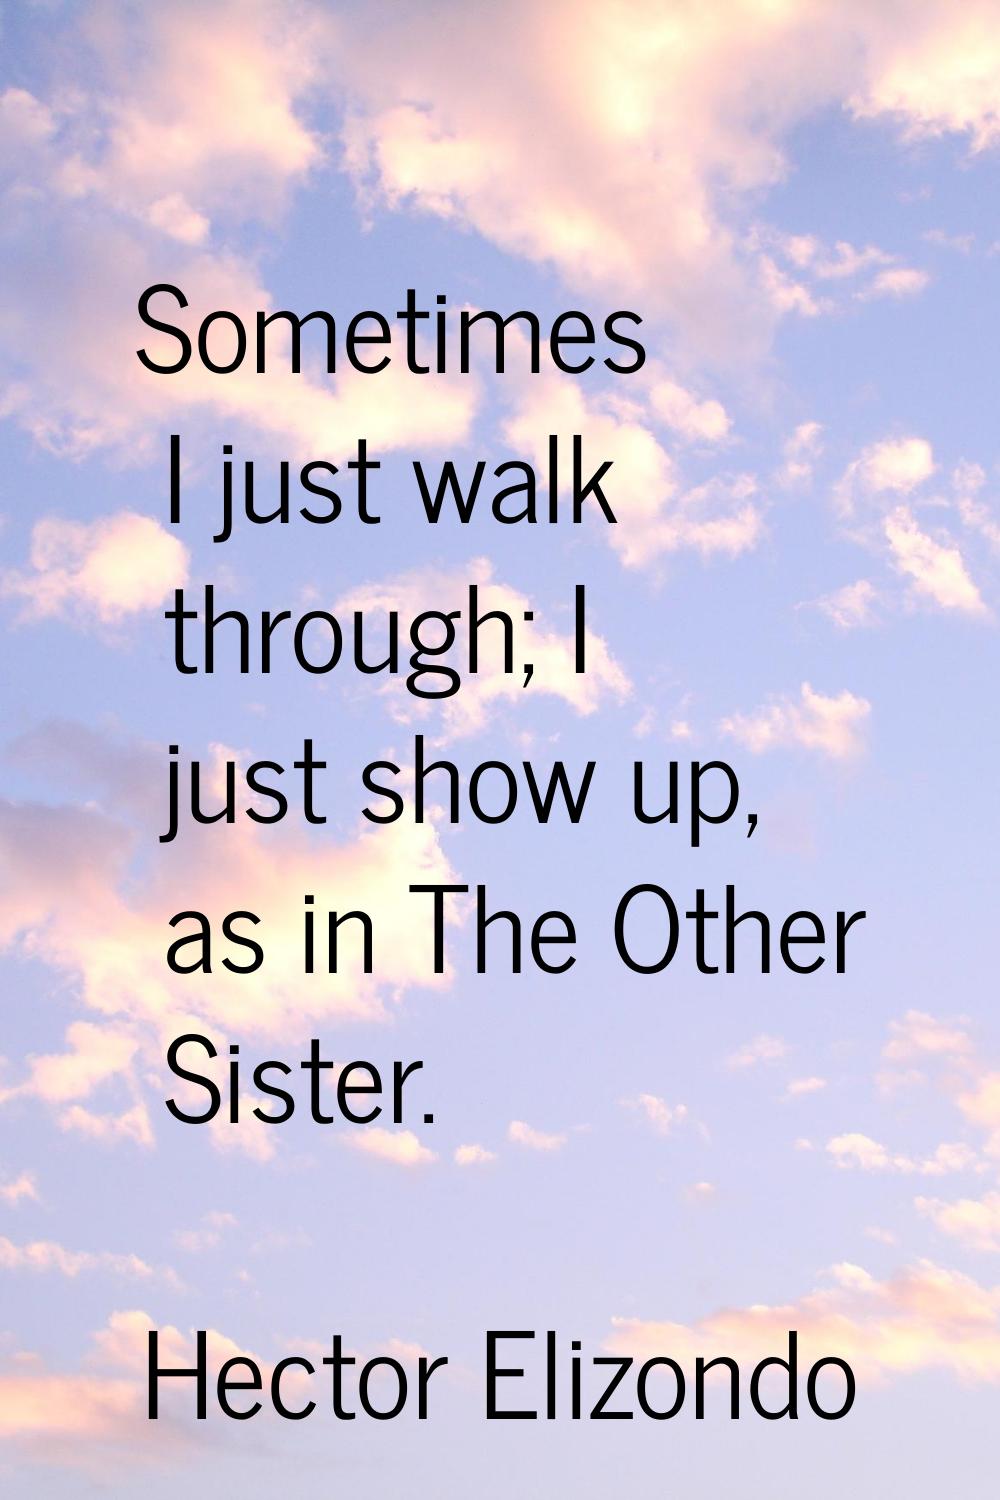 Sometimes I just walk through; I just show up, as in The Other Sister.